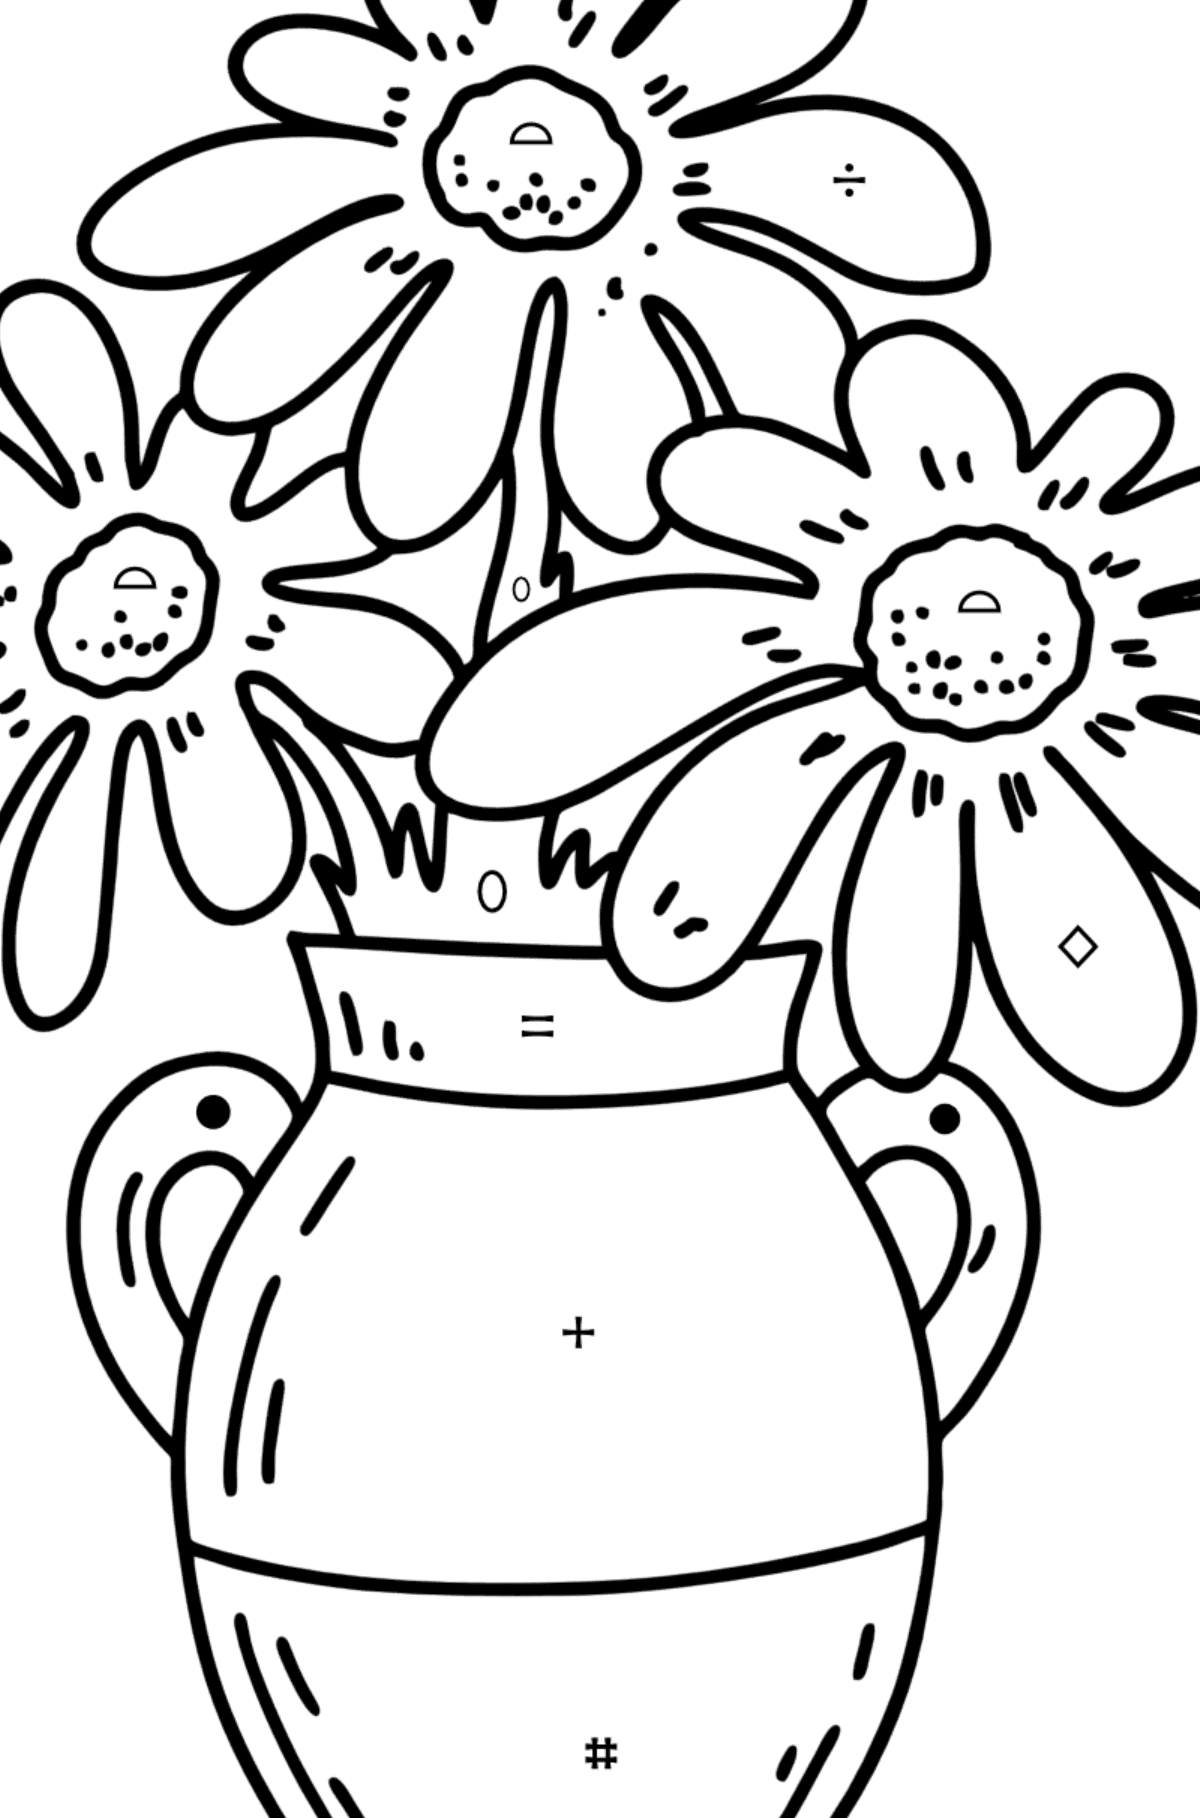 Summer Coloring page - Flowers in a vase - Coloring by Symbols and Geometric Shapes for Kids